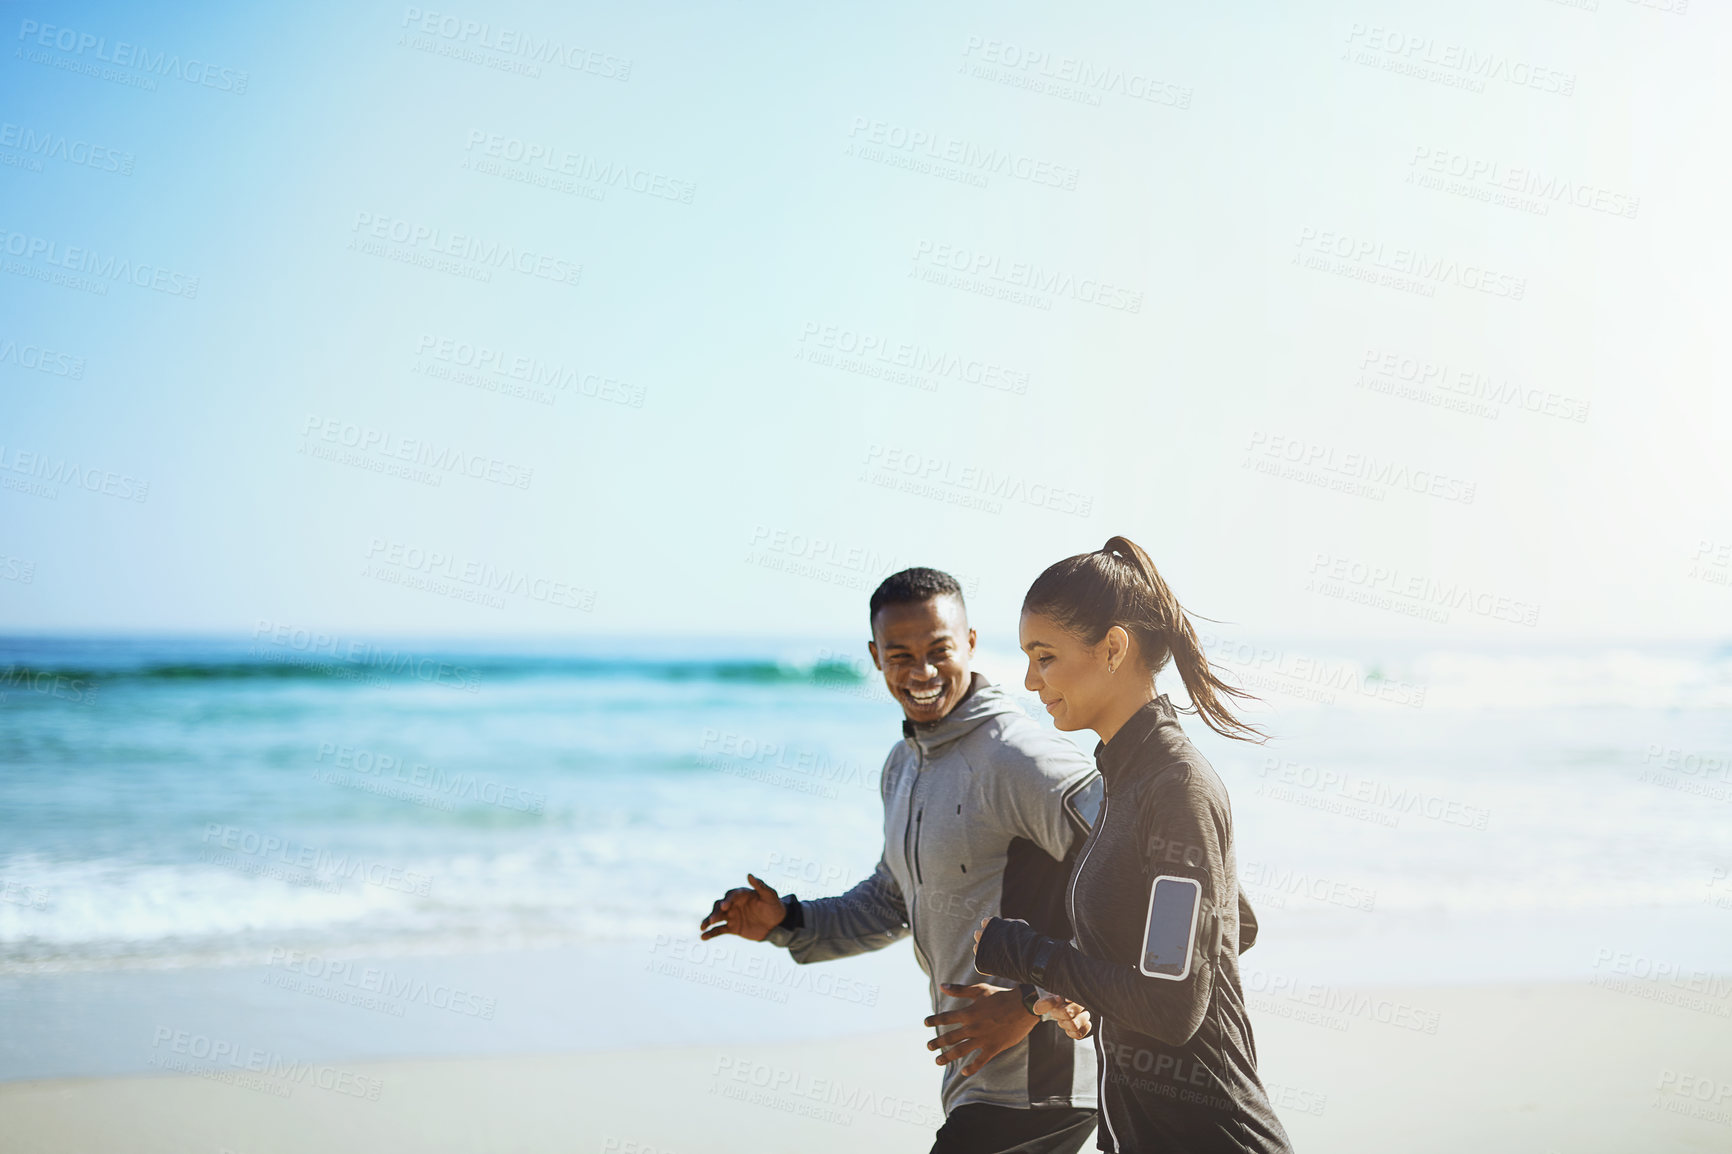 Buy stock photo Shot of a sporty young couple out for a run along the beach